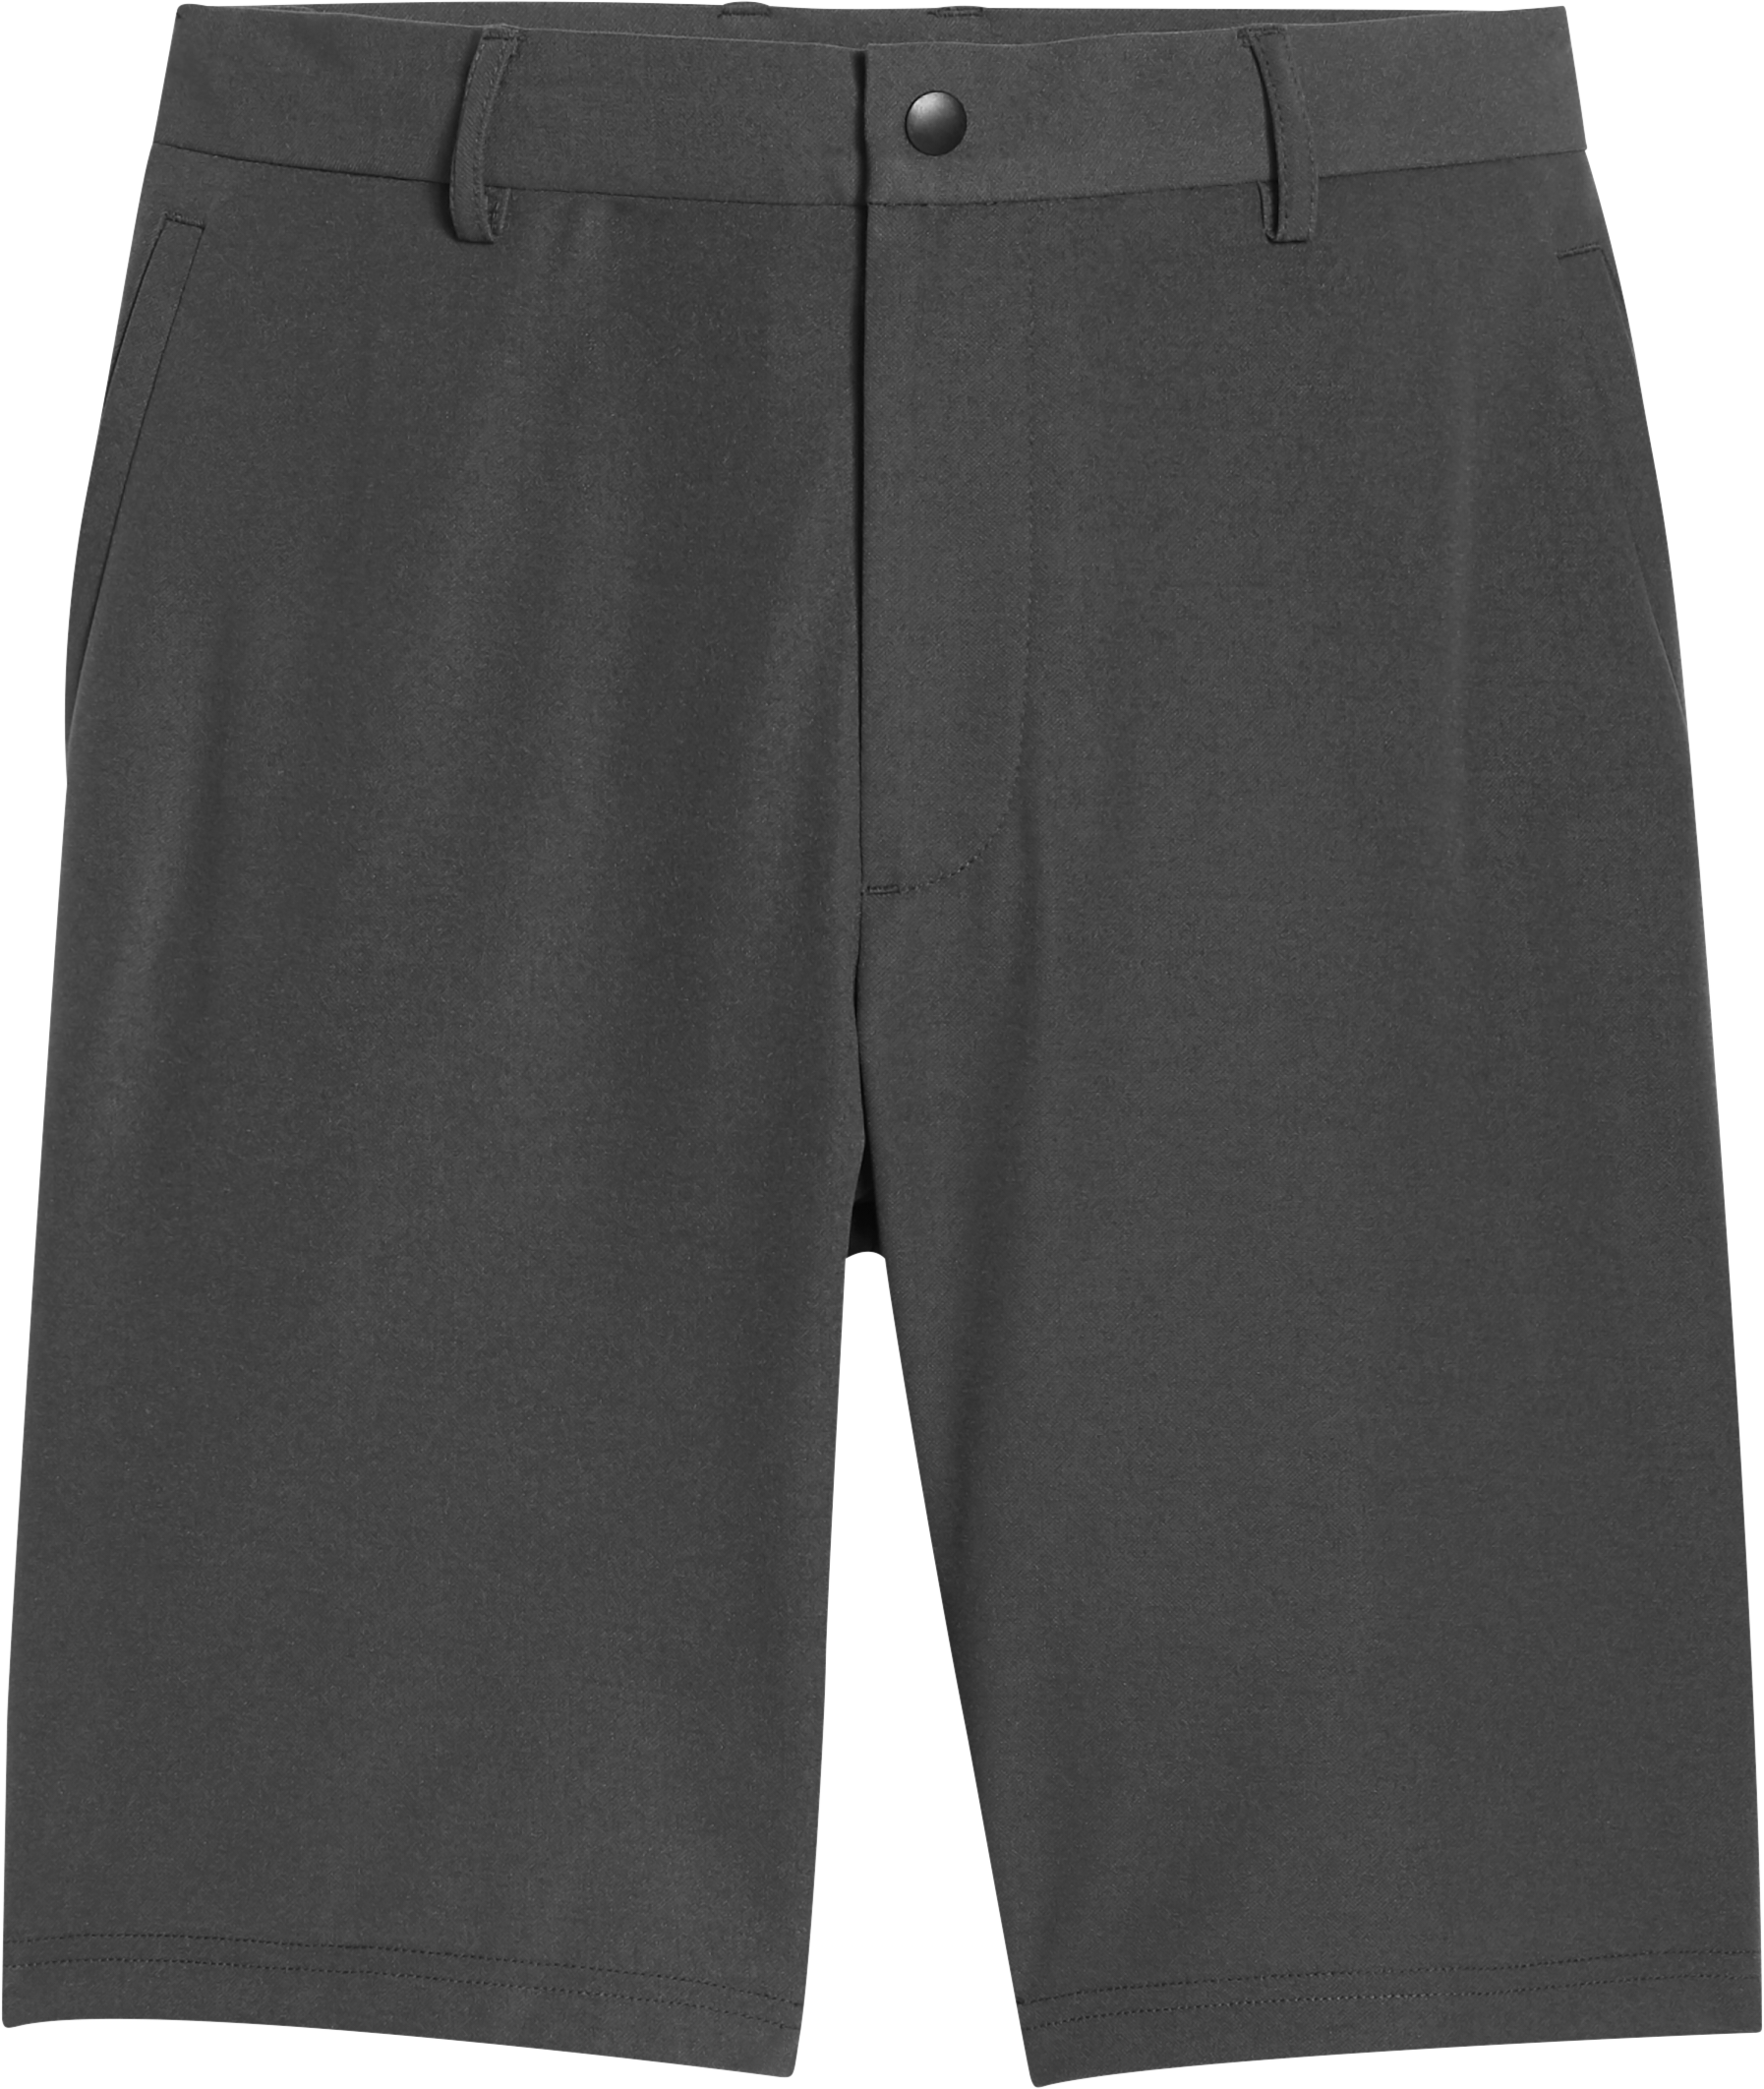 Msx By Michael Strahan Modern Fit Activewear Shorts Graphite Mens Sale Mens Wearhouse 